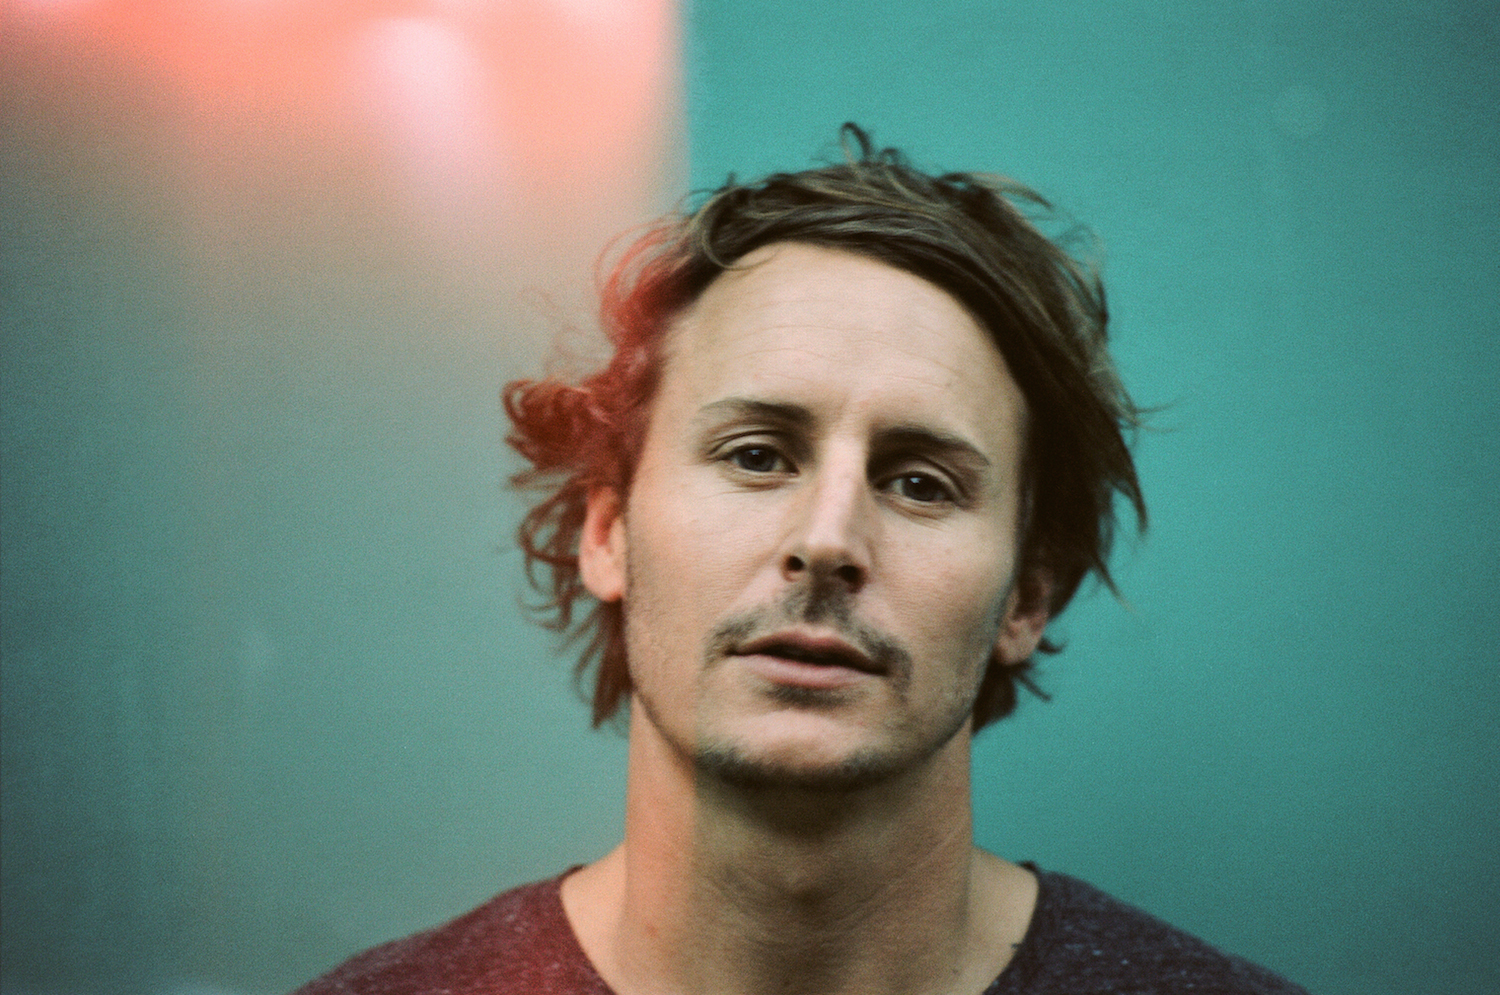 Ben Howard I Forget Where We Were Music Video Conversations About Her